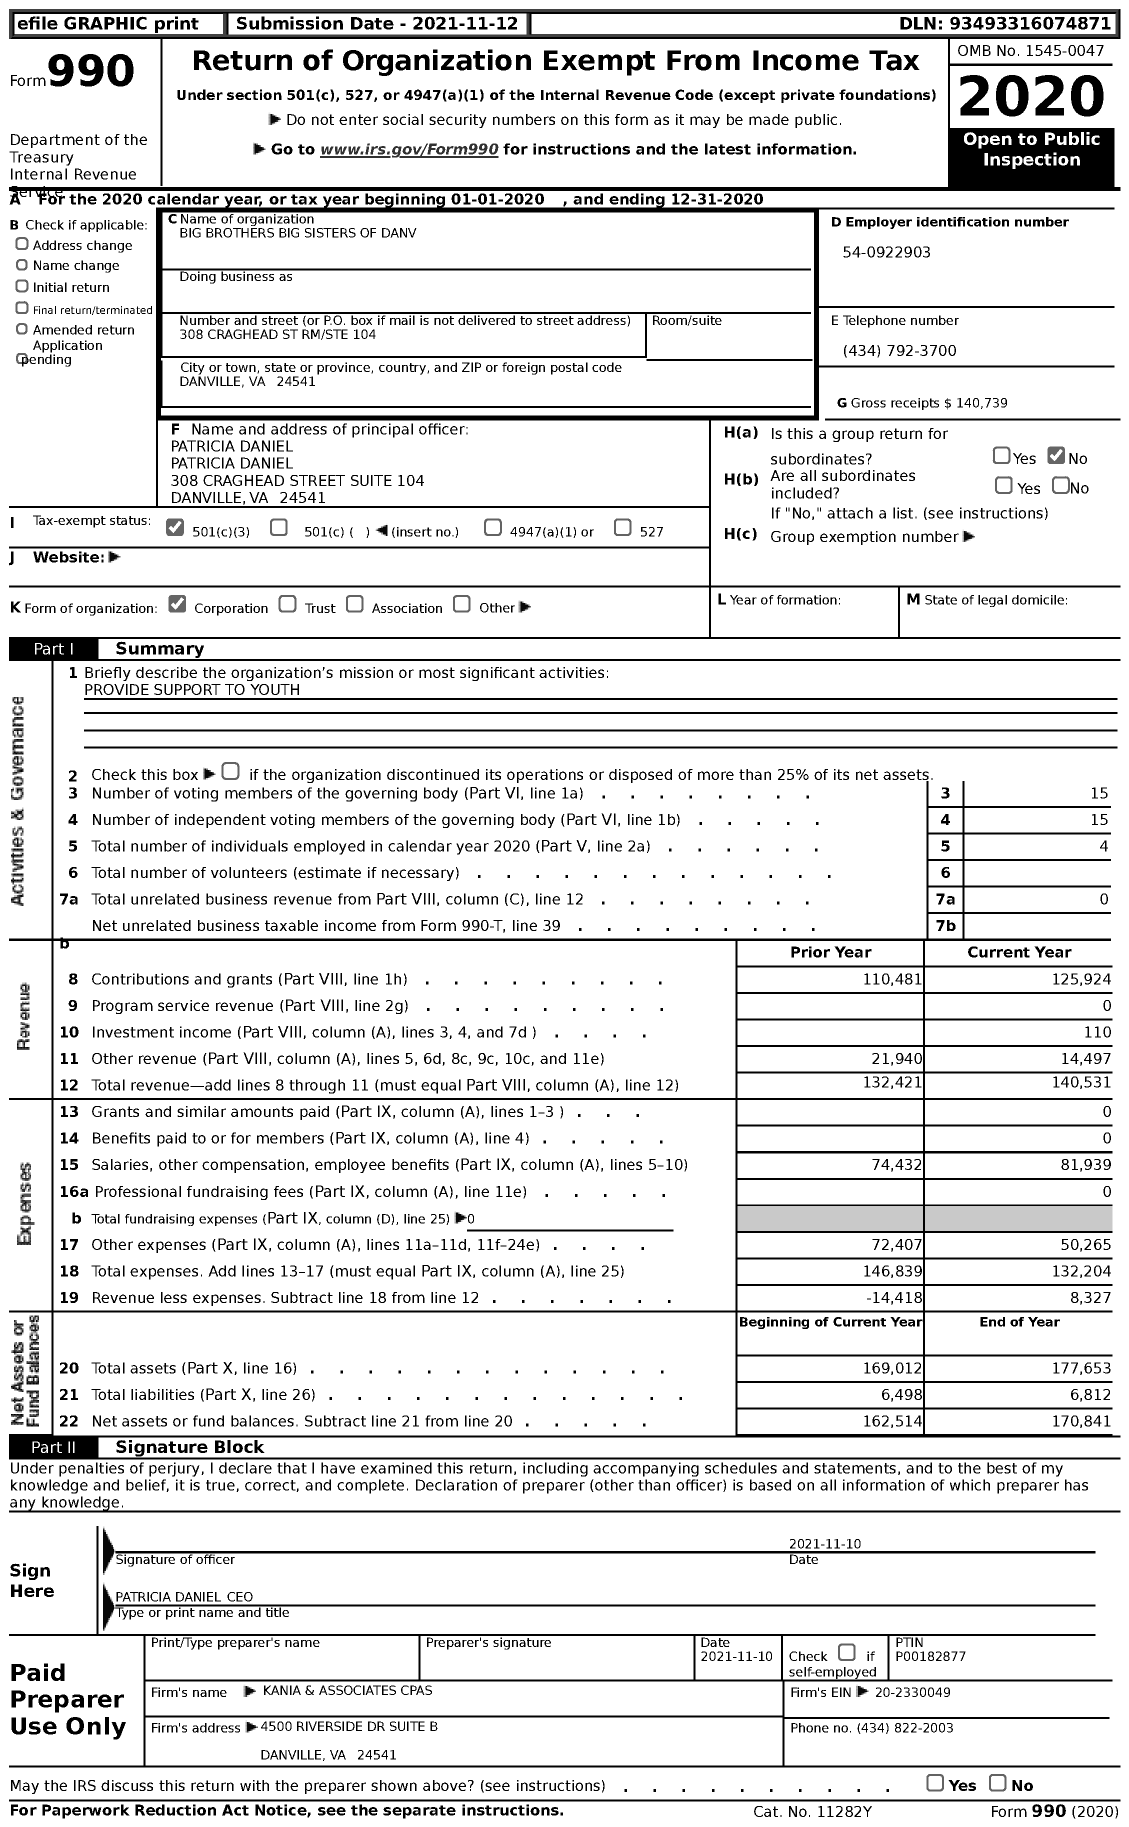 Image of first page of 2020 Form 990 for Big Brothers Big Sisters of Danv